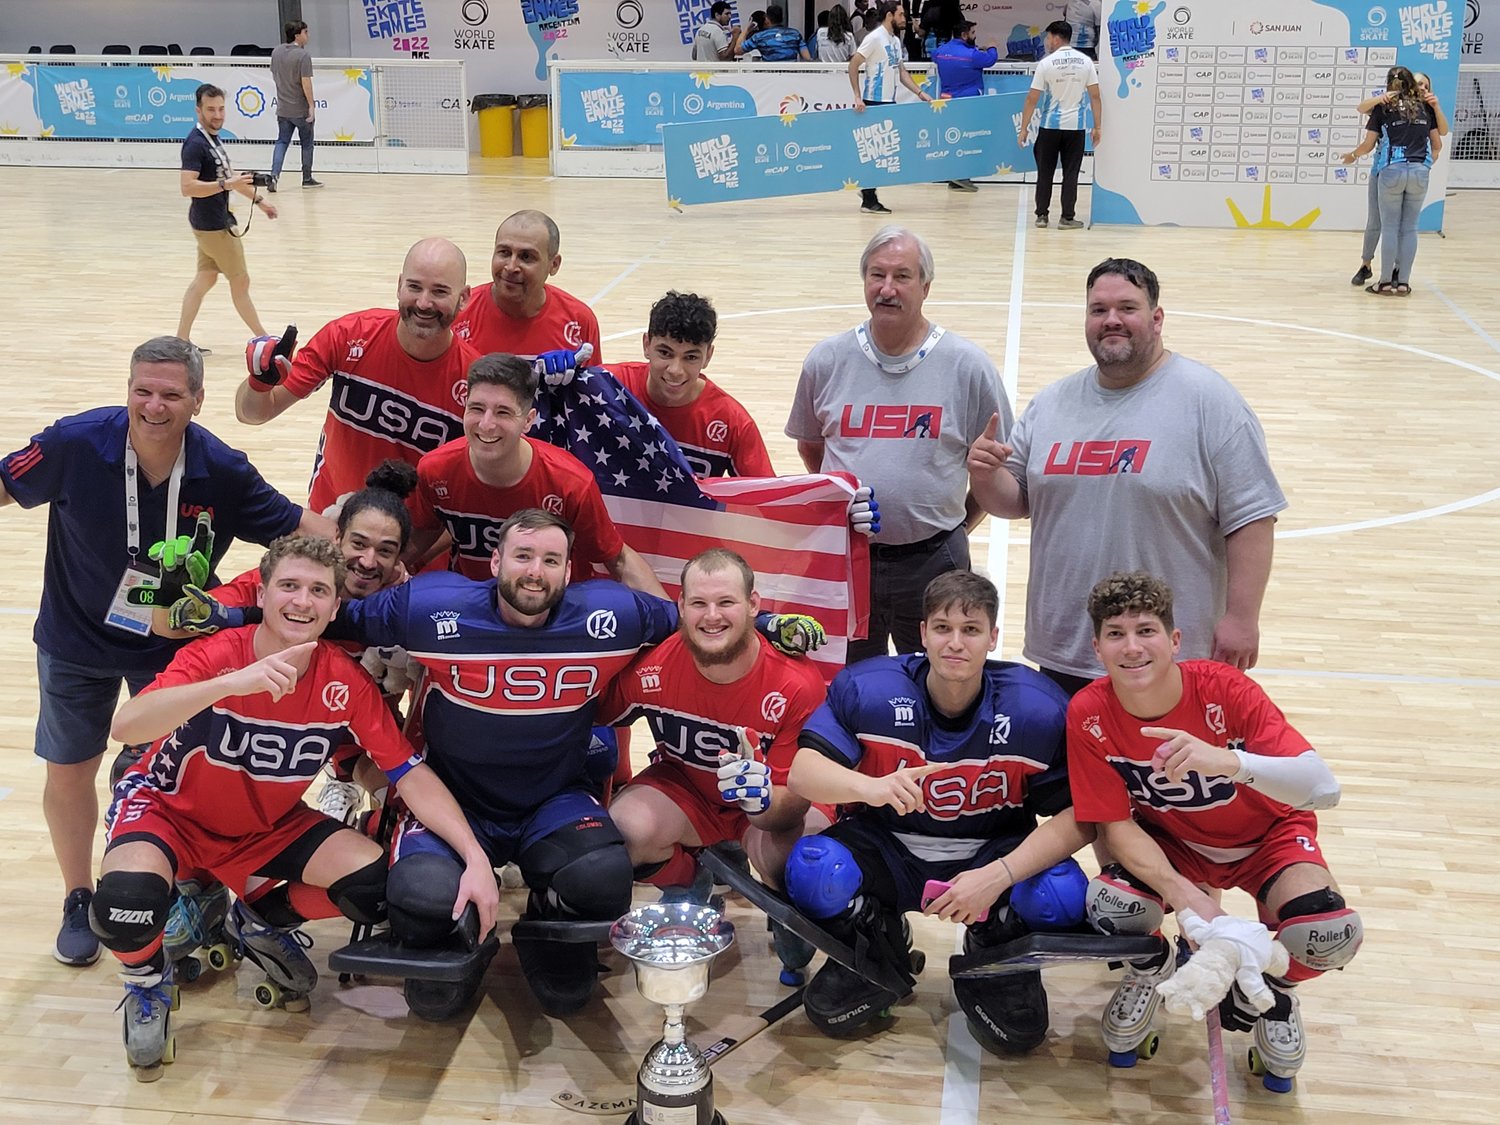 Team USA celebrates winning their division and the Challengers Cup at the World Roller Games in San Juan, Argentina earlier this fall.